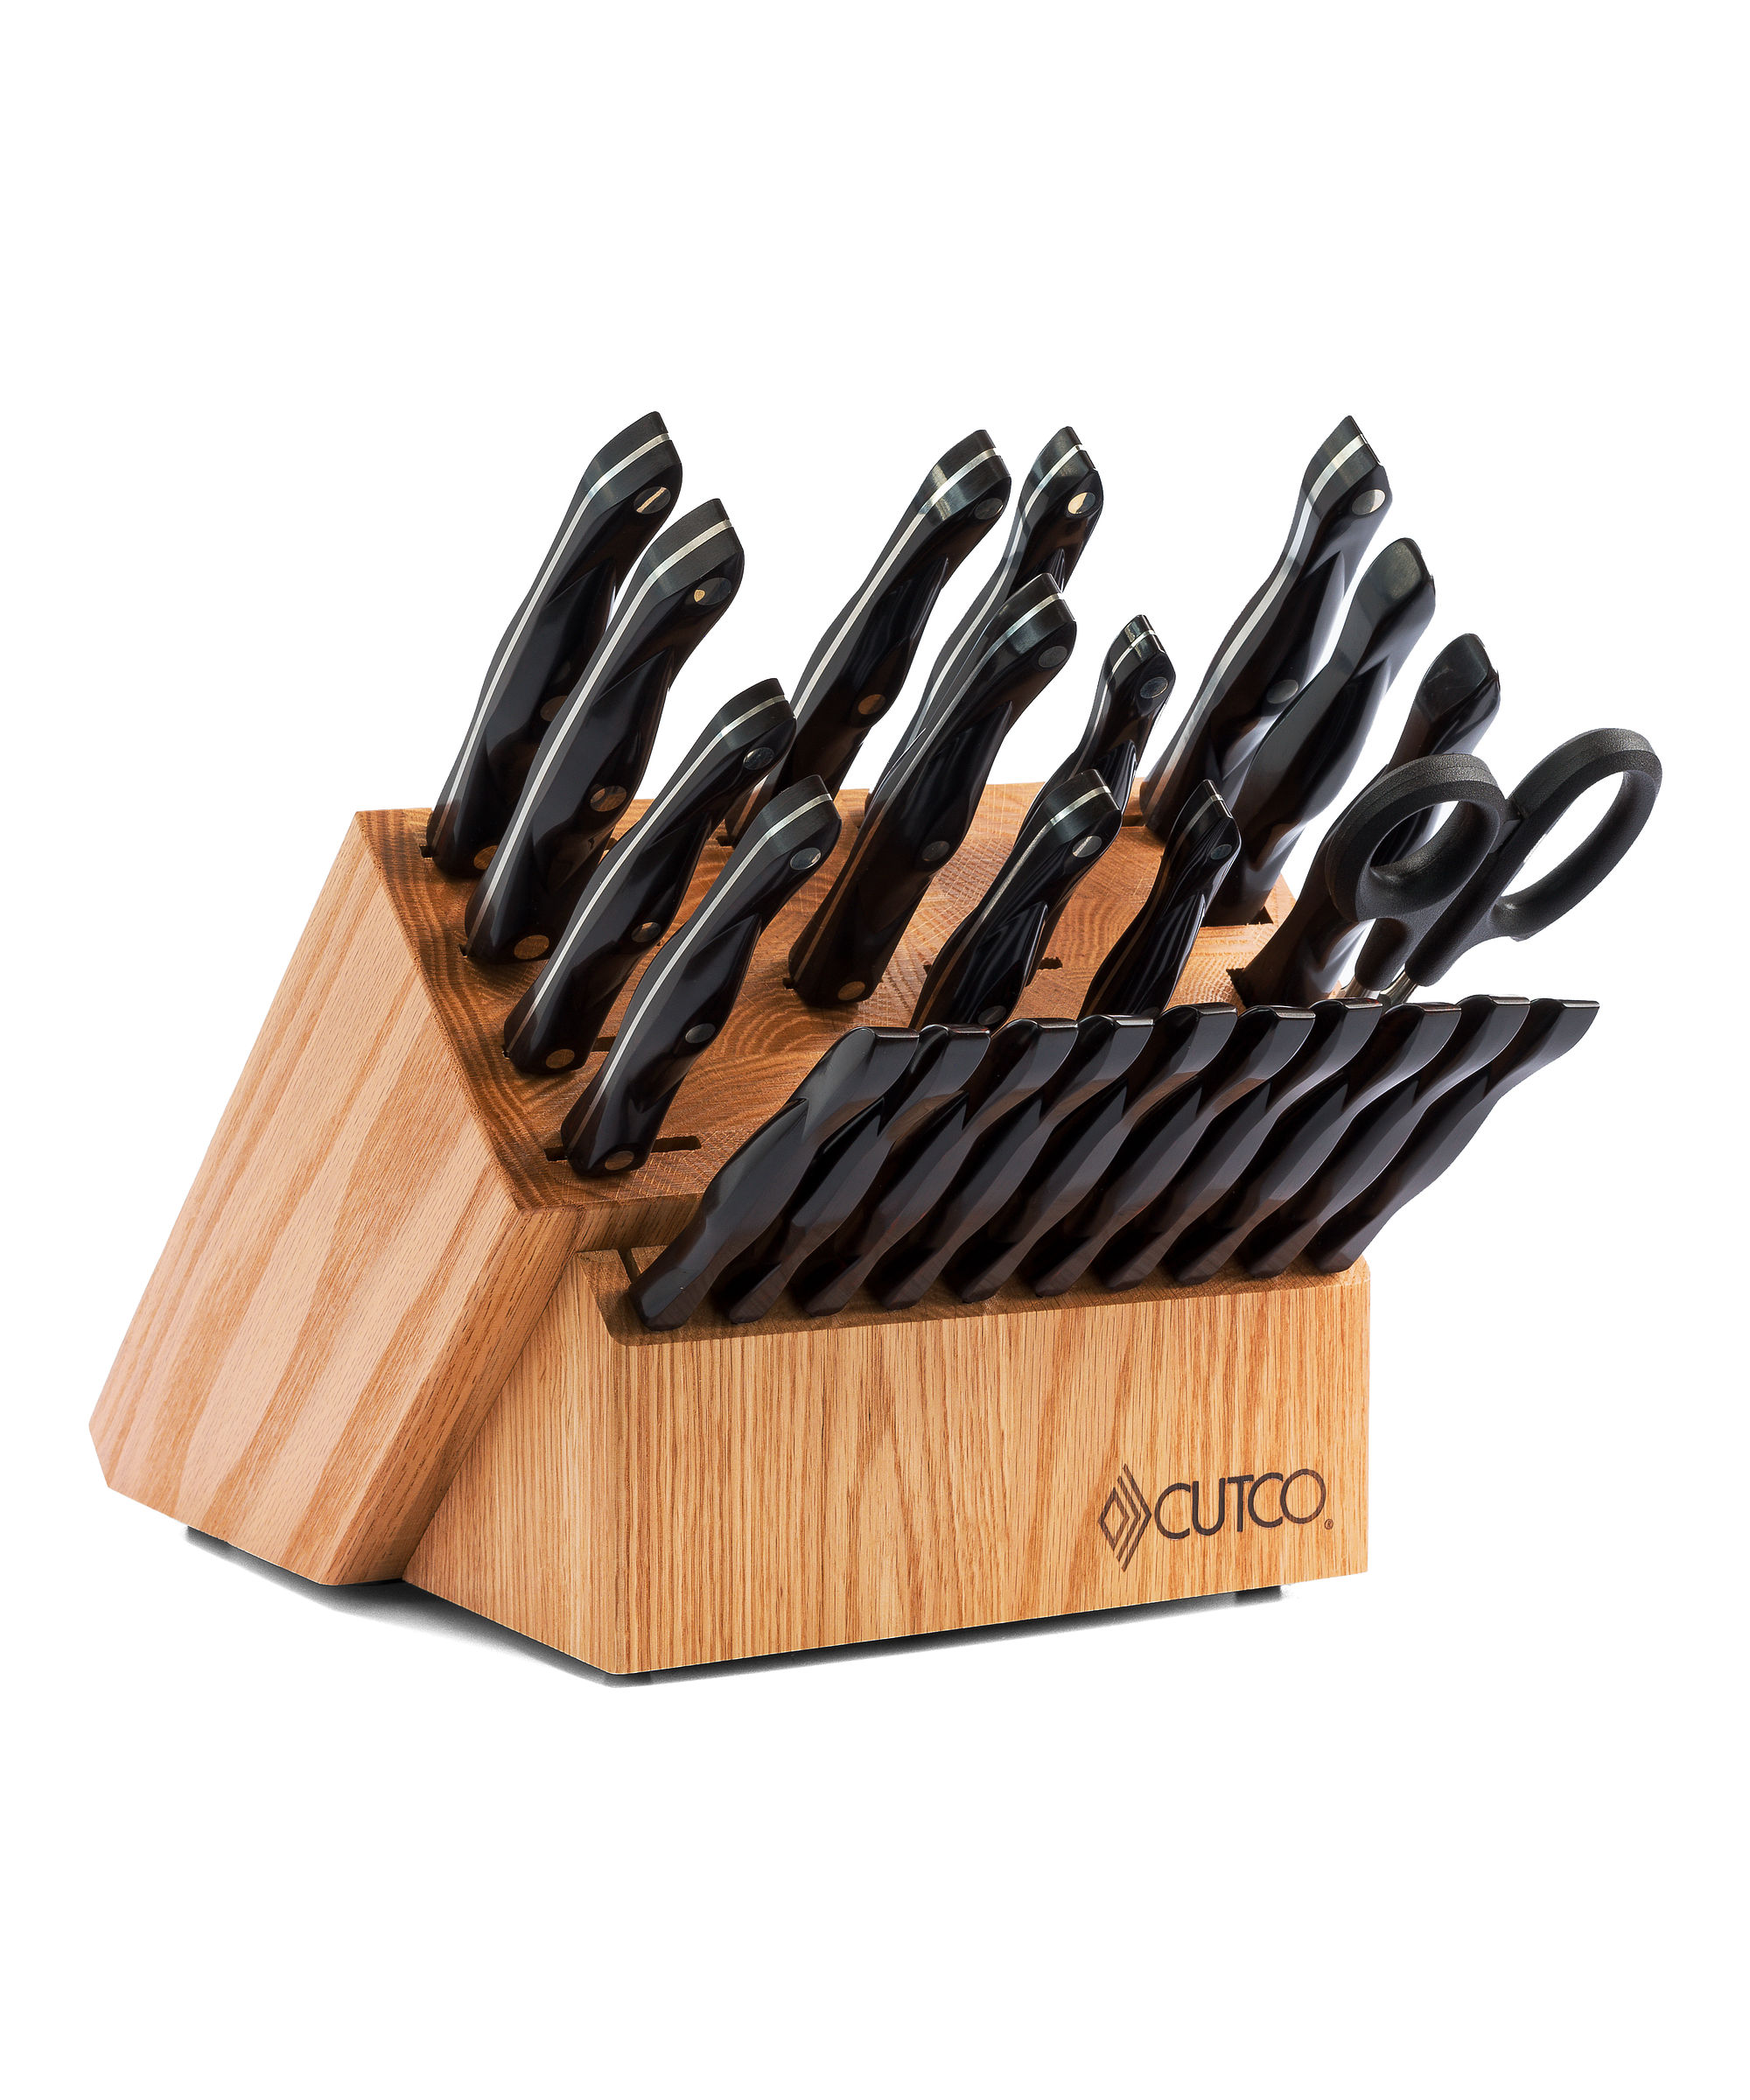 Knife Sets with a Block by Cutco